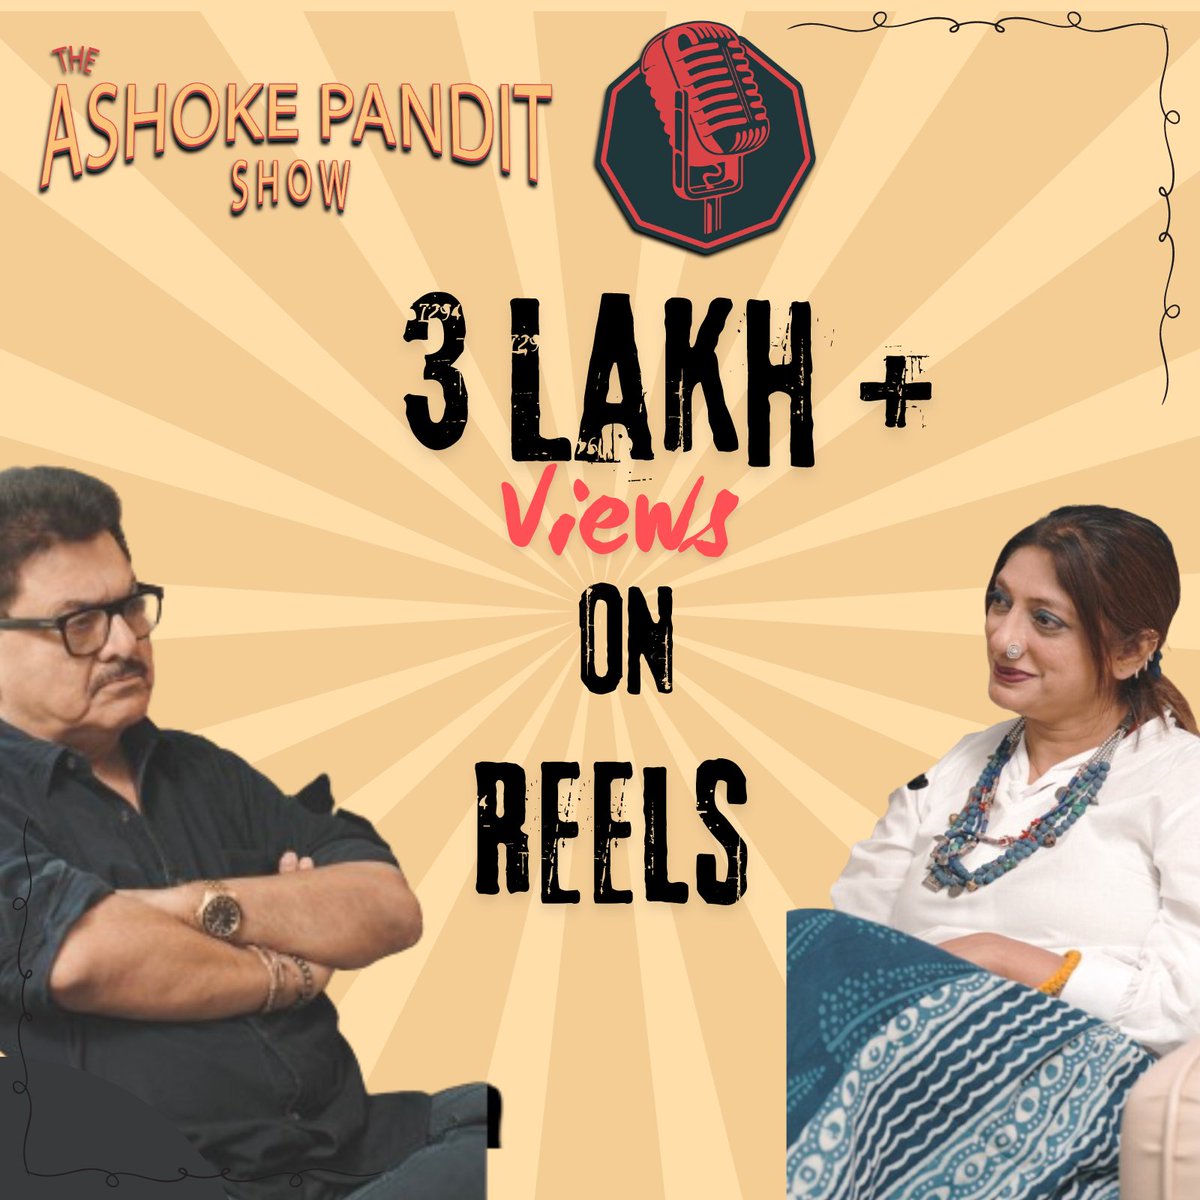 Thank You for the love & support towards our show 🥰 #TheAshokePanditShow #ashokepandit #jignavora #intsgram #reels #successs #love #support #podcast